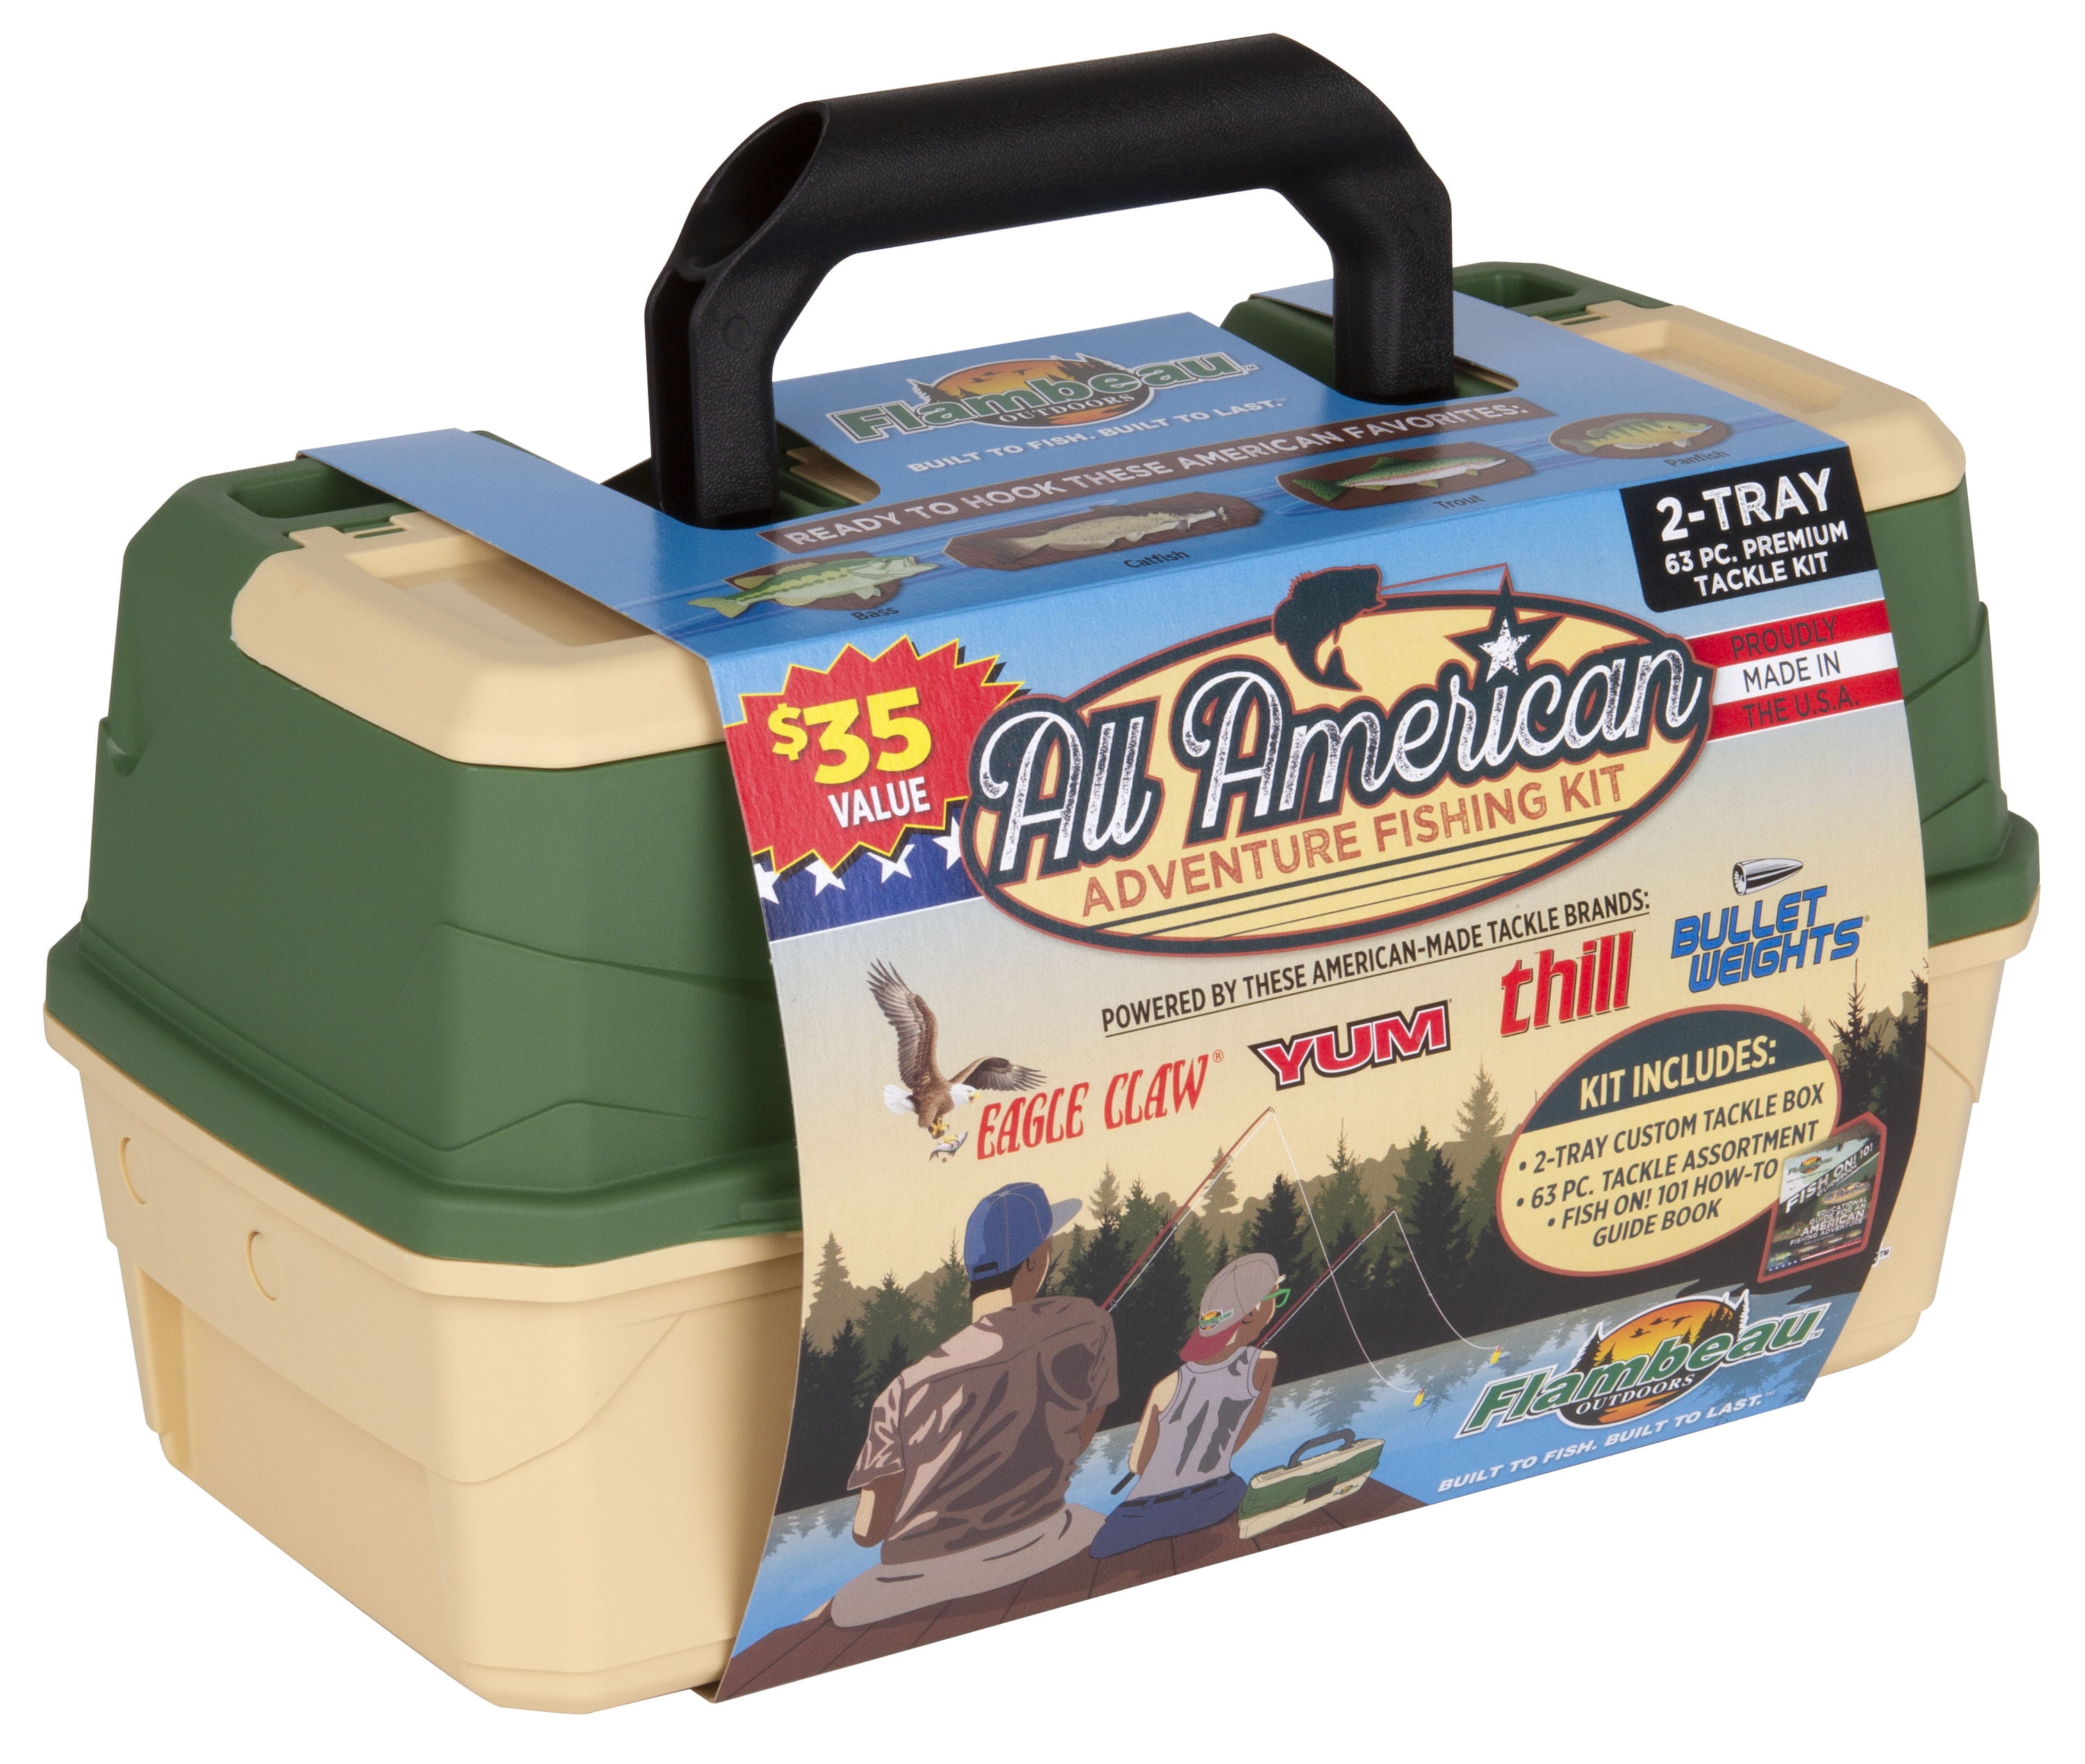 Beginner's guide to fishing: Tackle box essentials